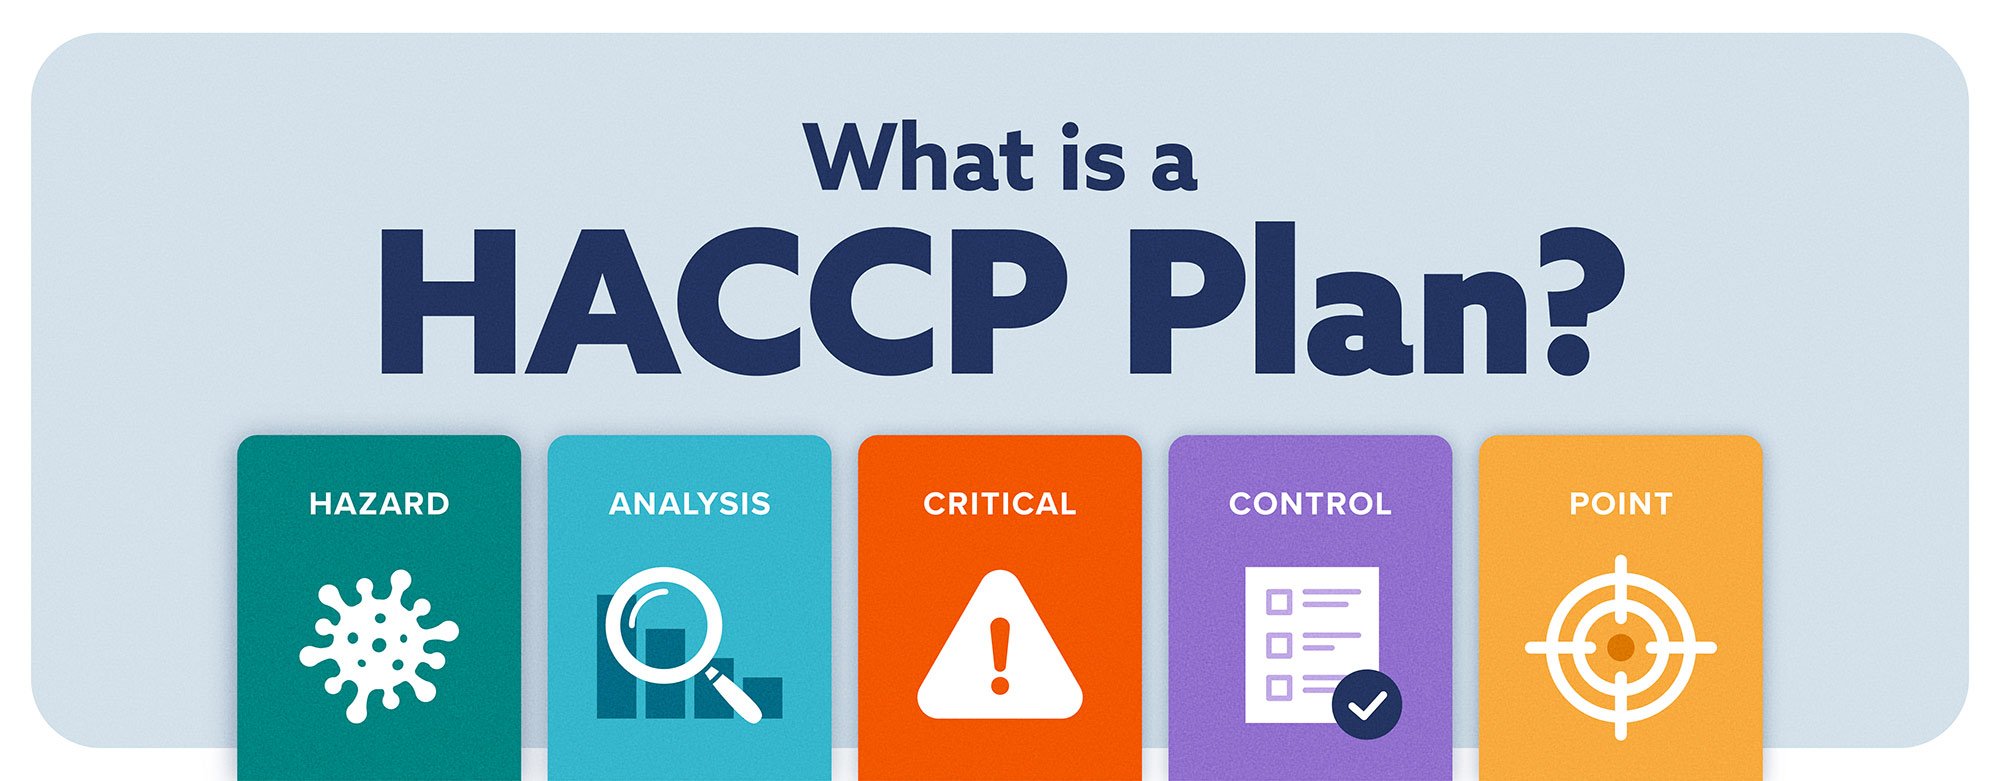 What Is a HACCP Plan? 